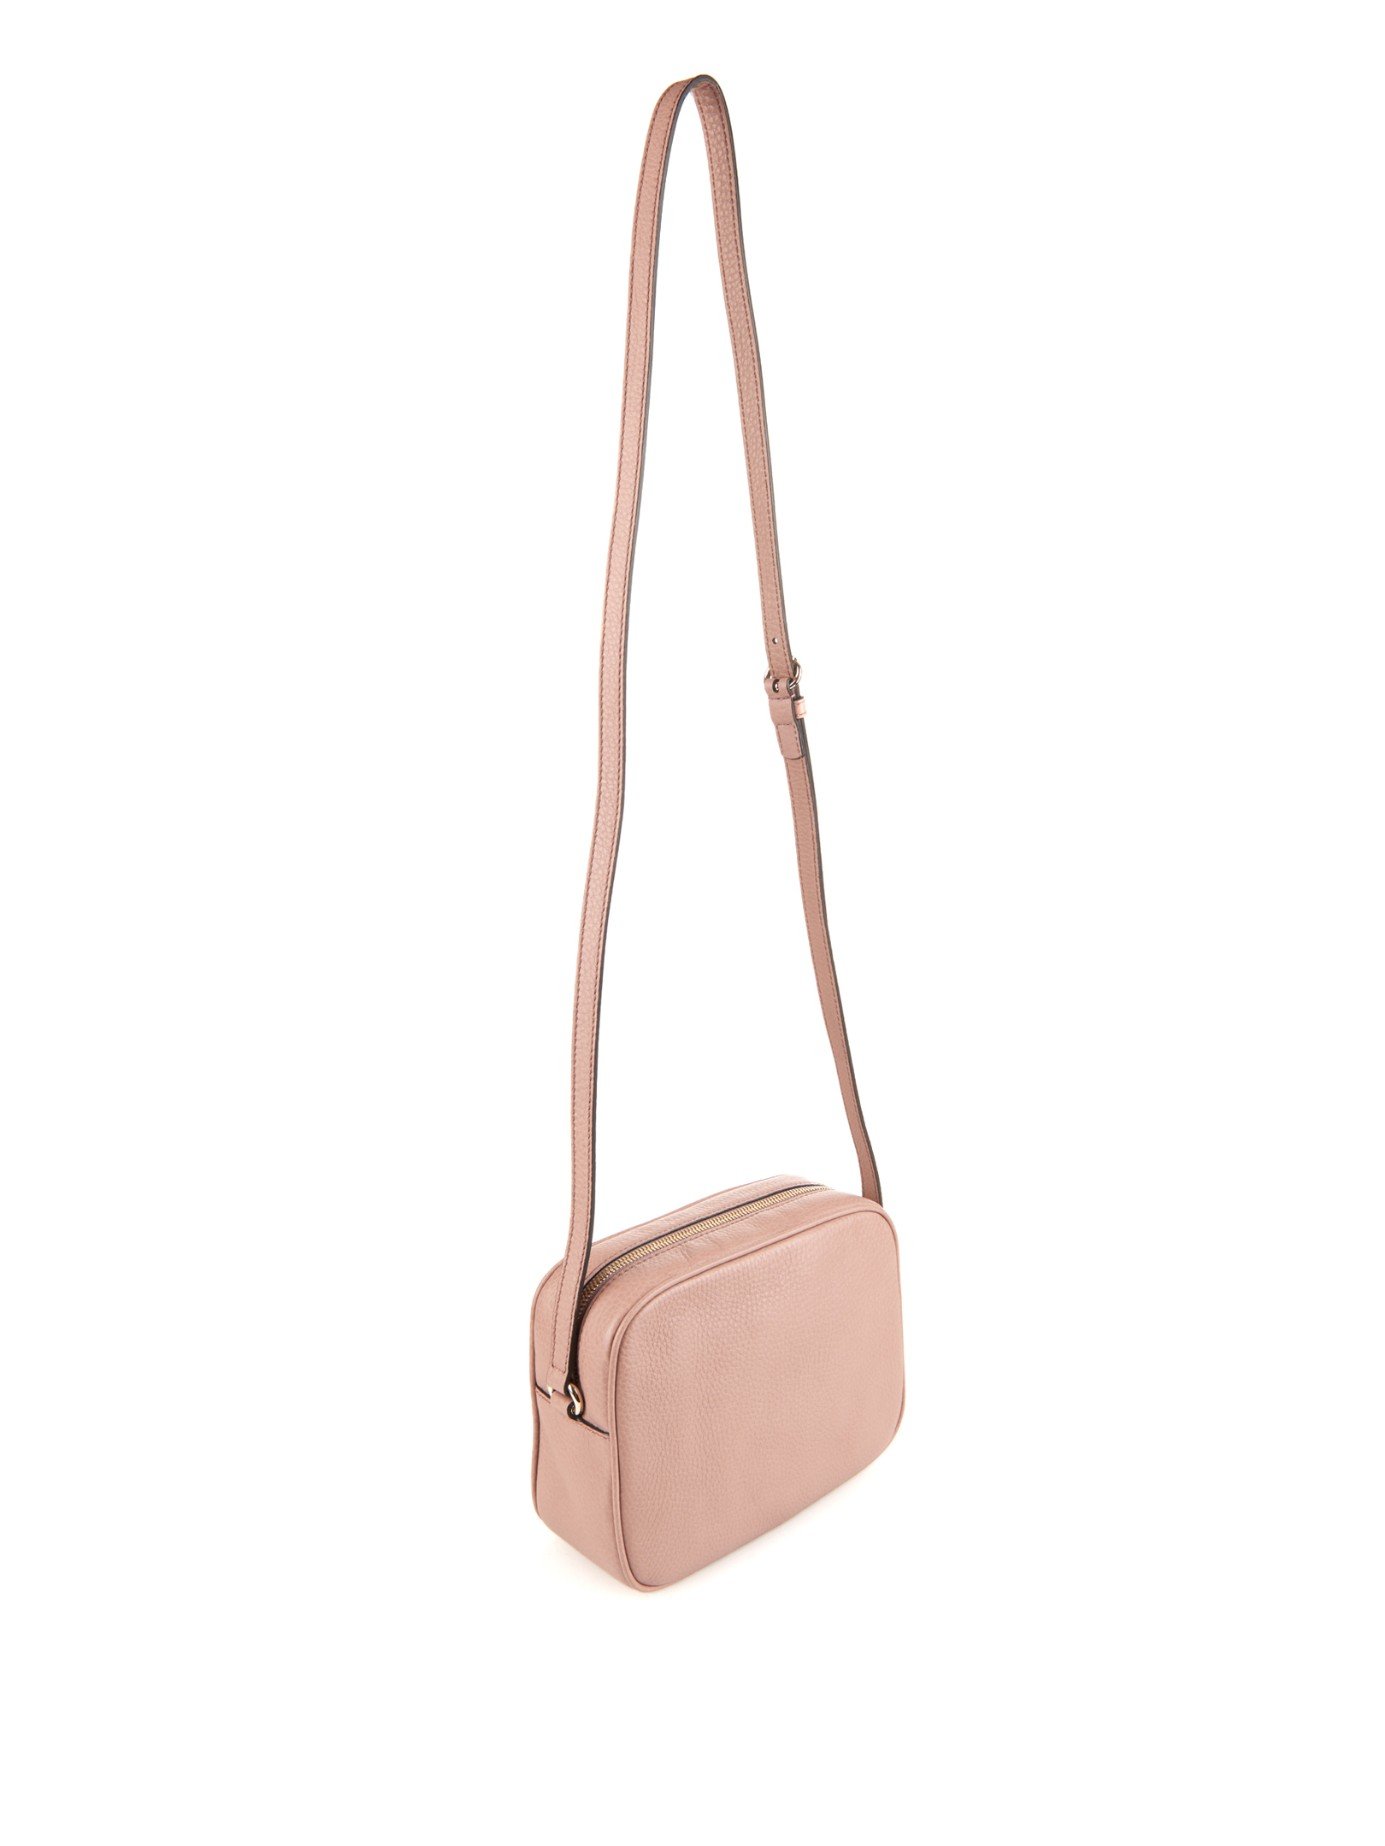 Gucci Soho Leather Cross-Body Bag in Pink | Lyst